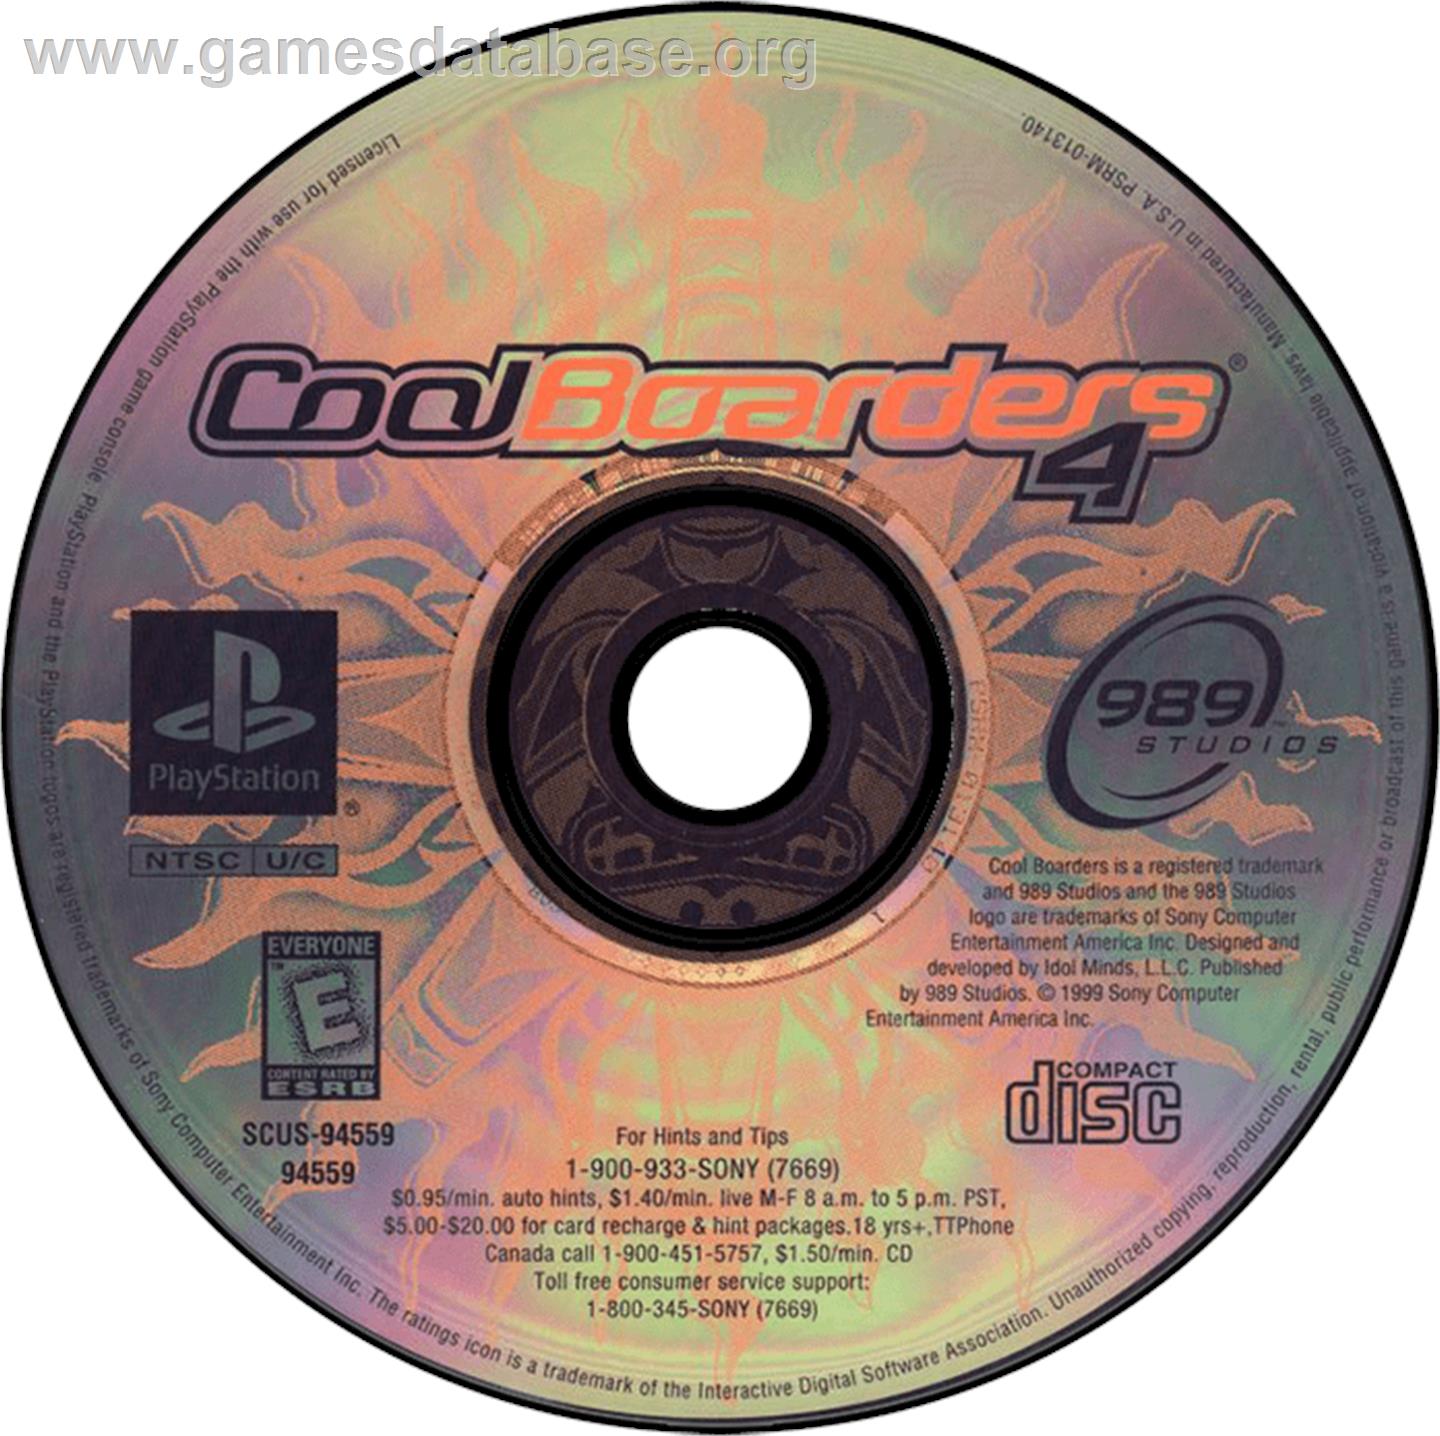 Cool Boarders 4 - Sony Playstation - Artwork - Disc